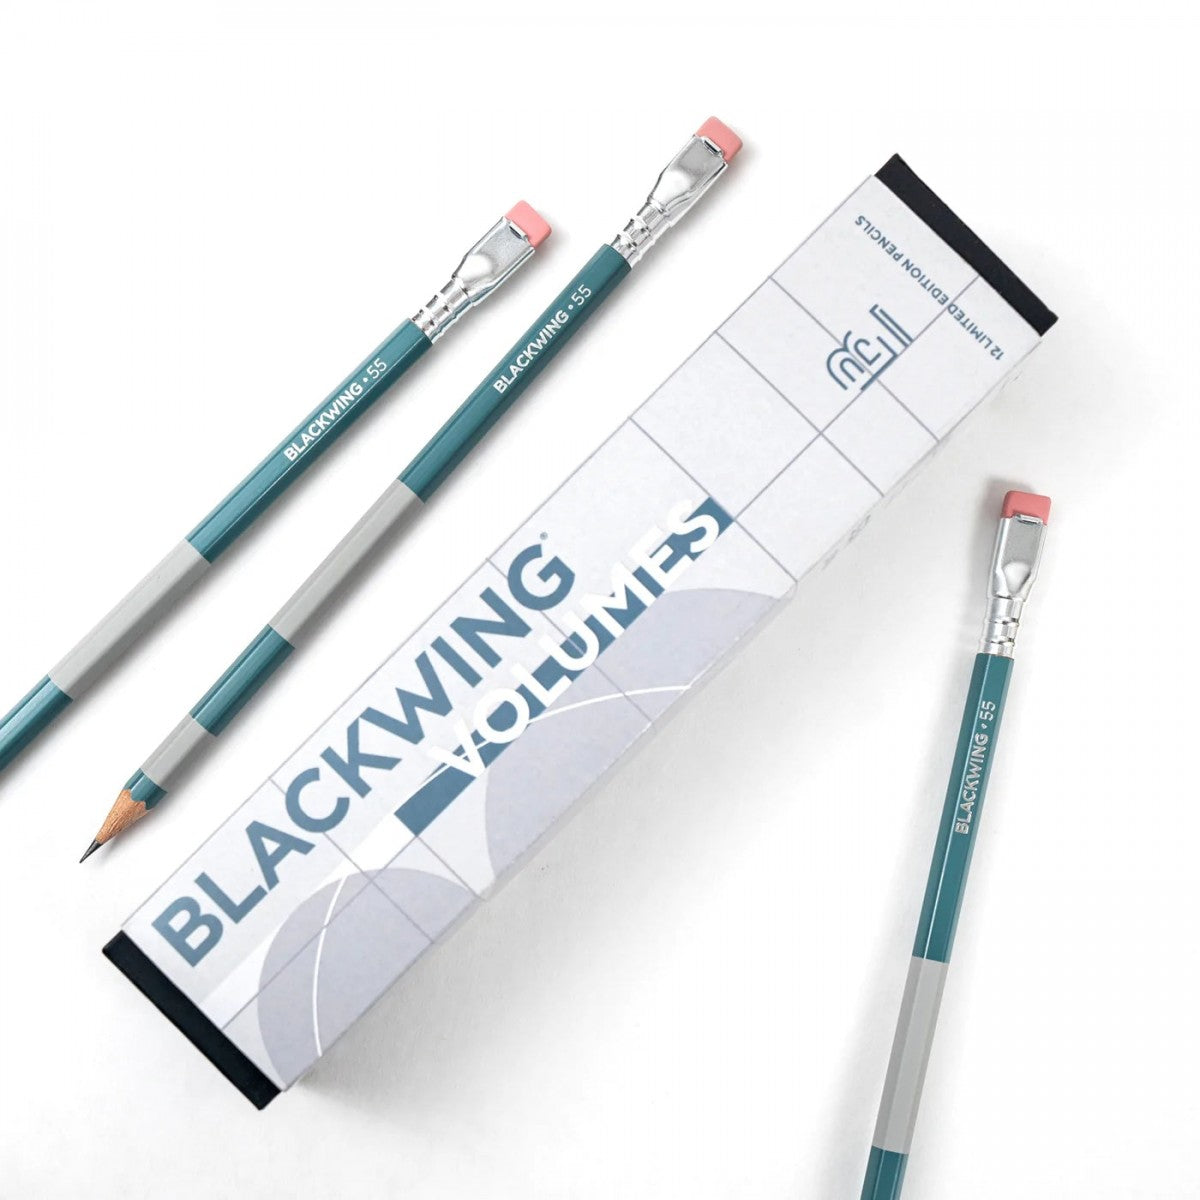 Blackwing Limited Edition Volume 55 - Box of 12 Pencils